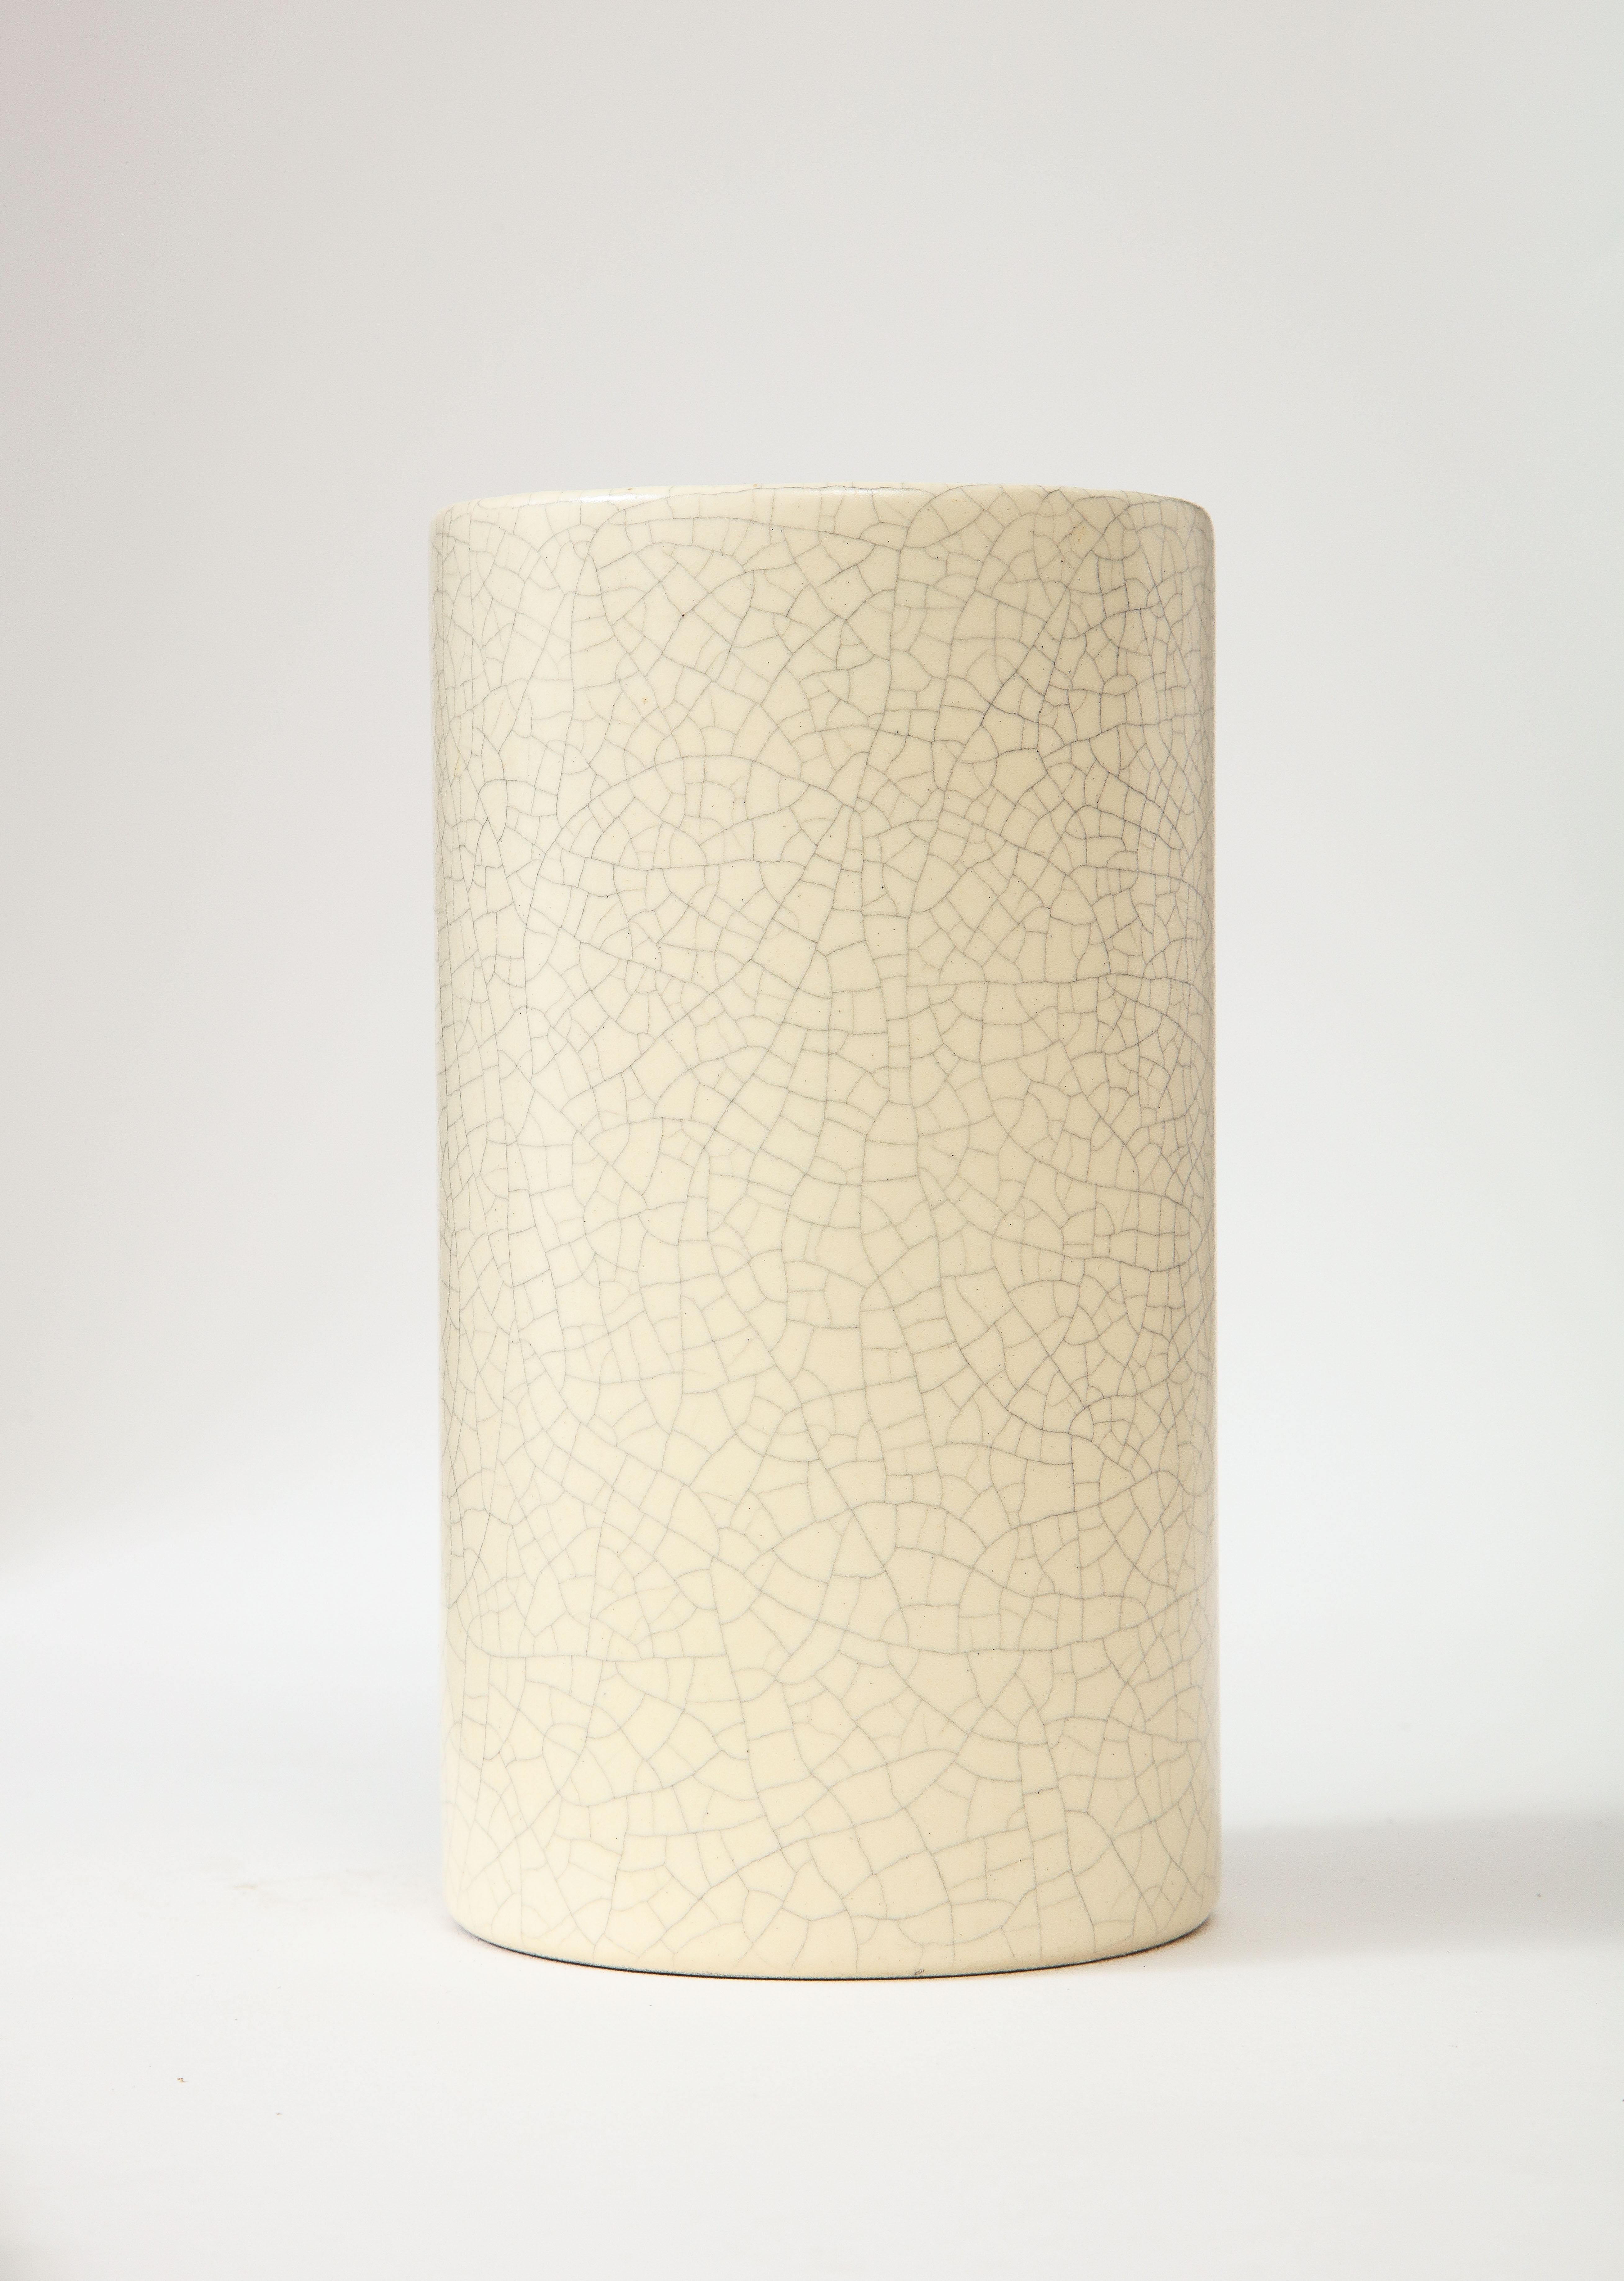 Off-White Crackle Vase, France, c. 1960 In Good Condition For Sale In Brooklyn, NY